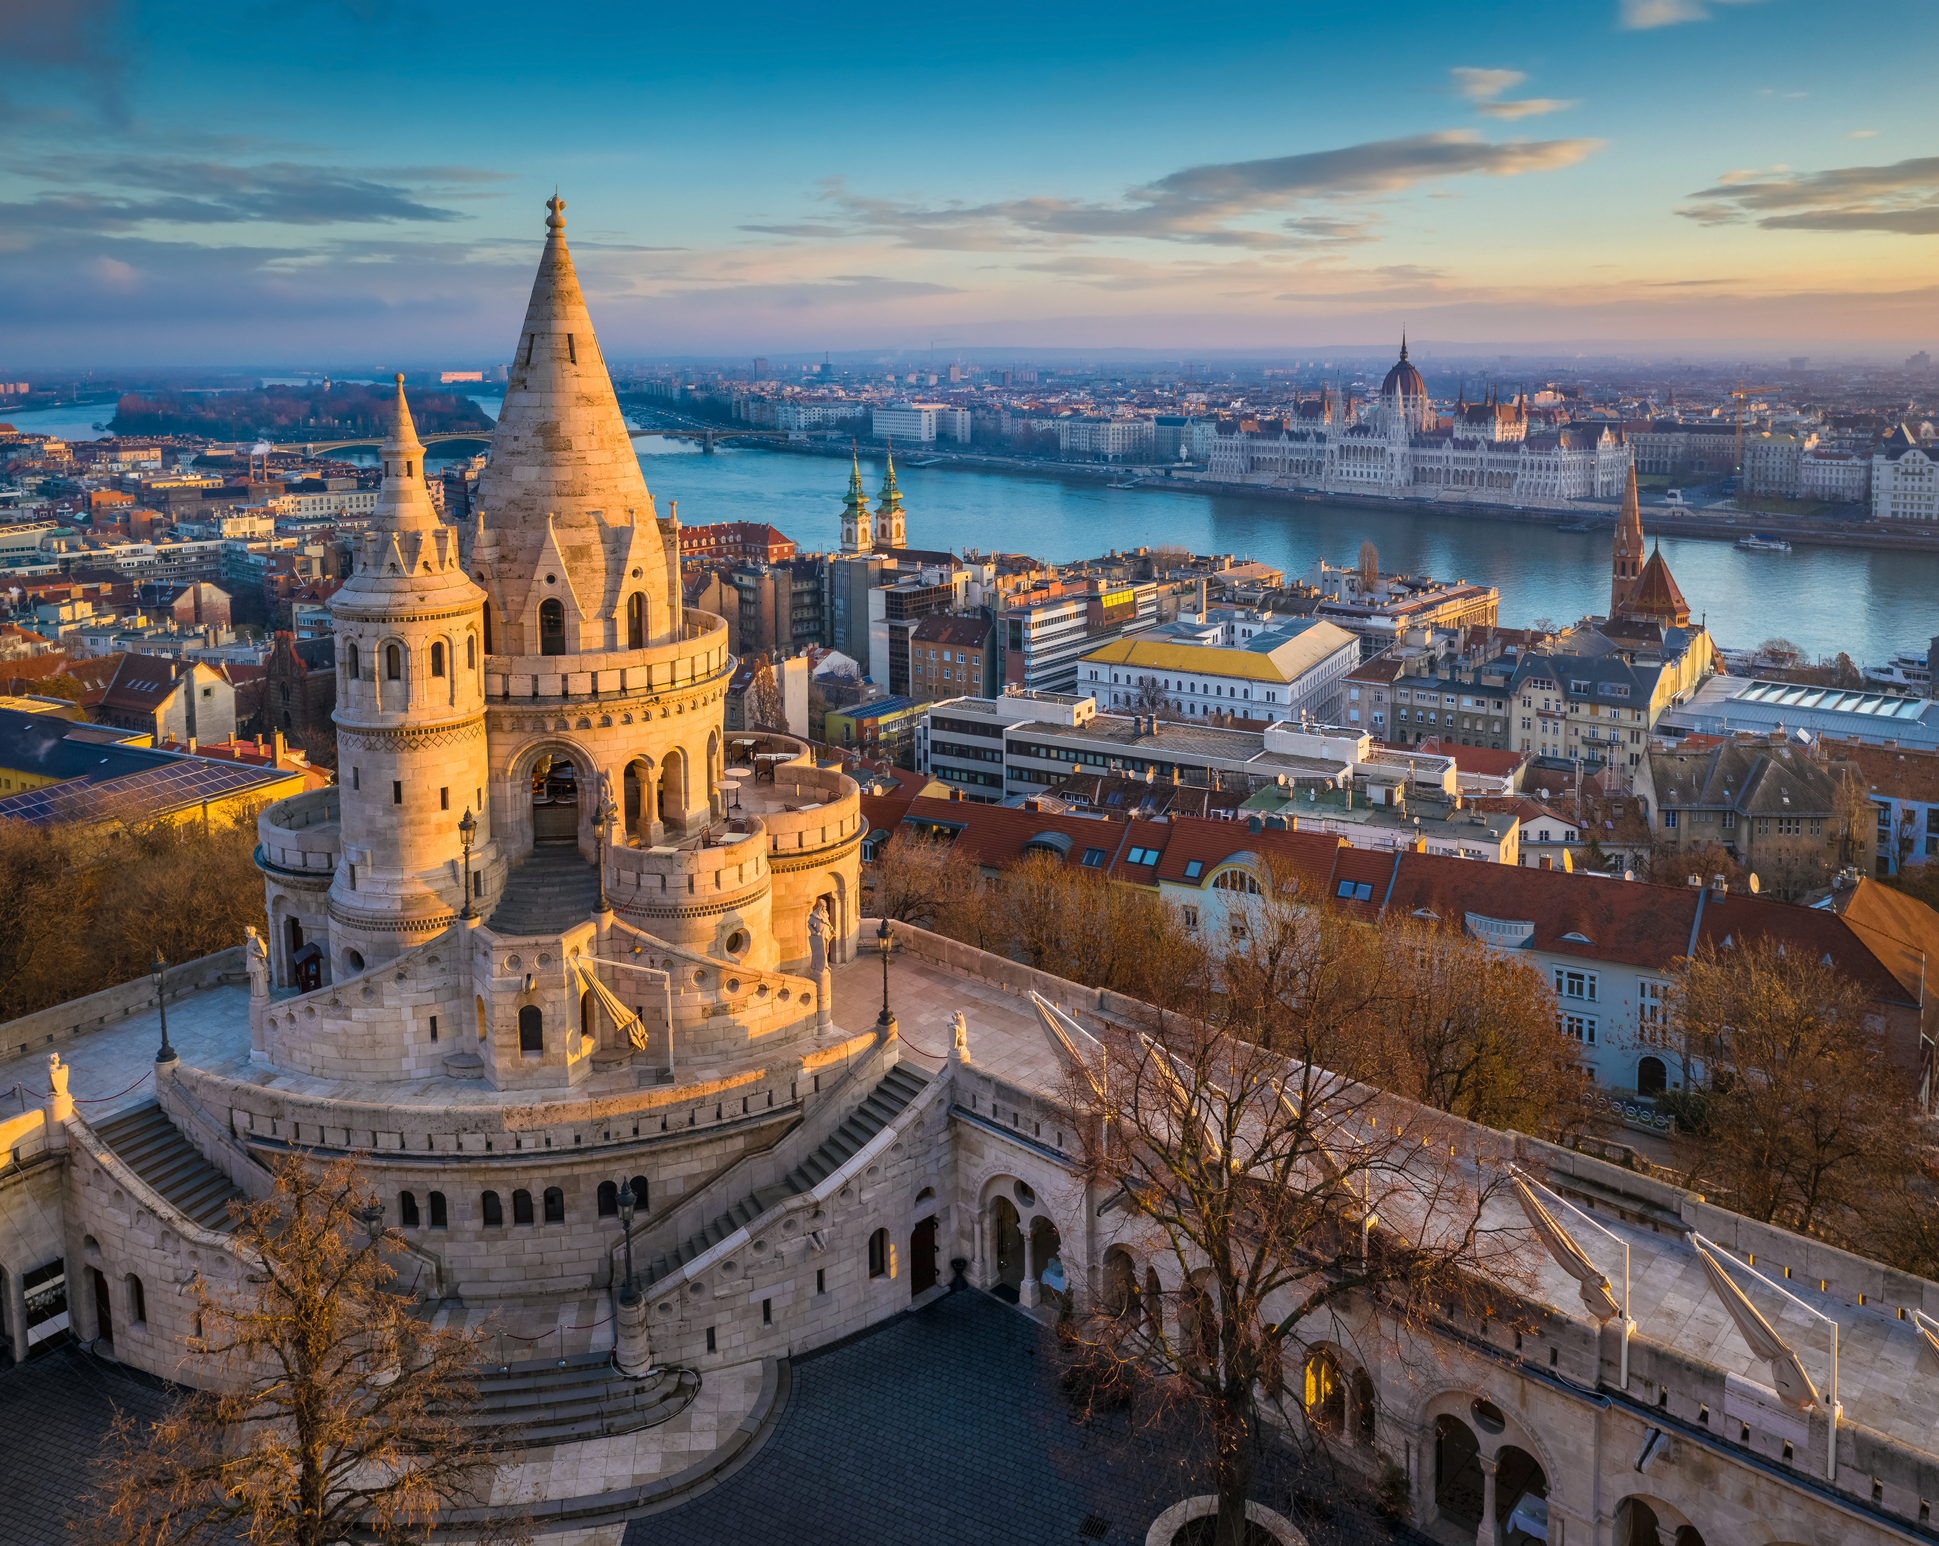 Budapest GettyImages-1172437911.jpg